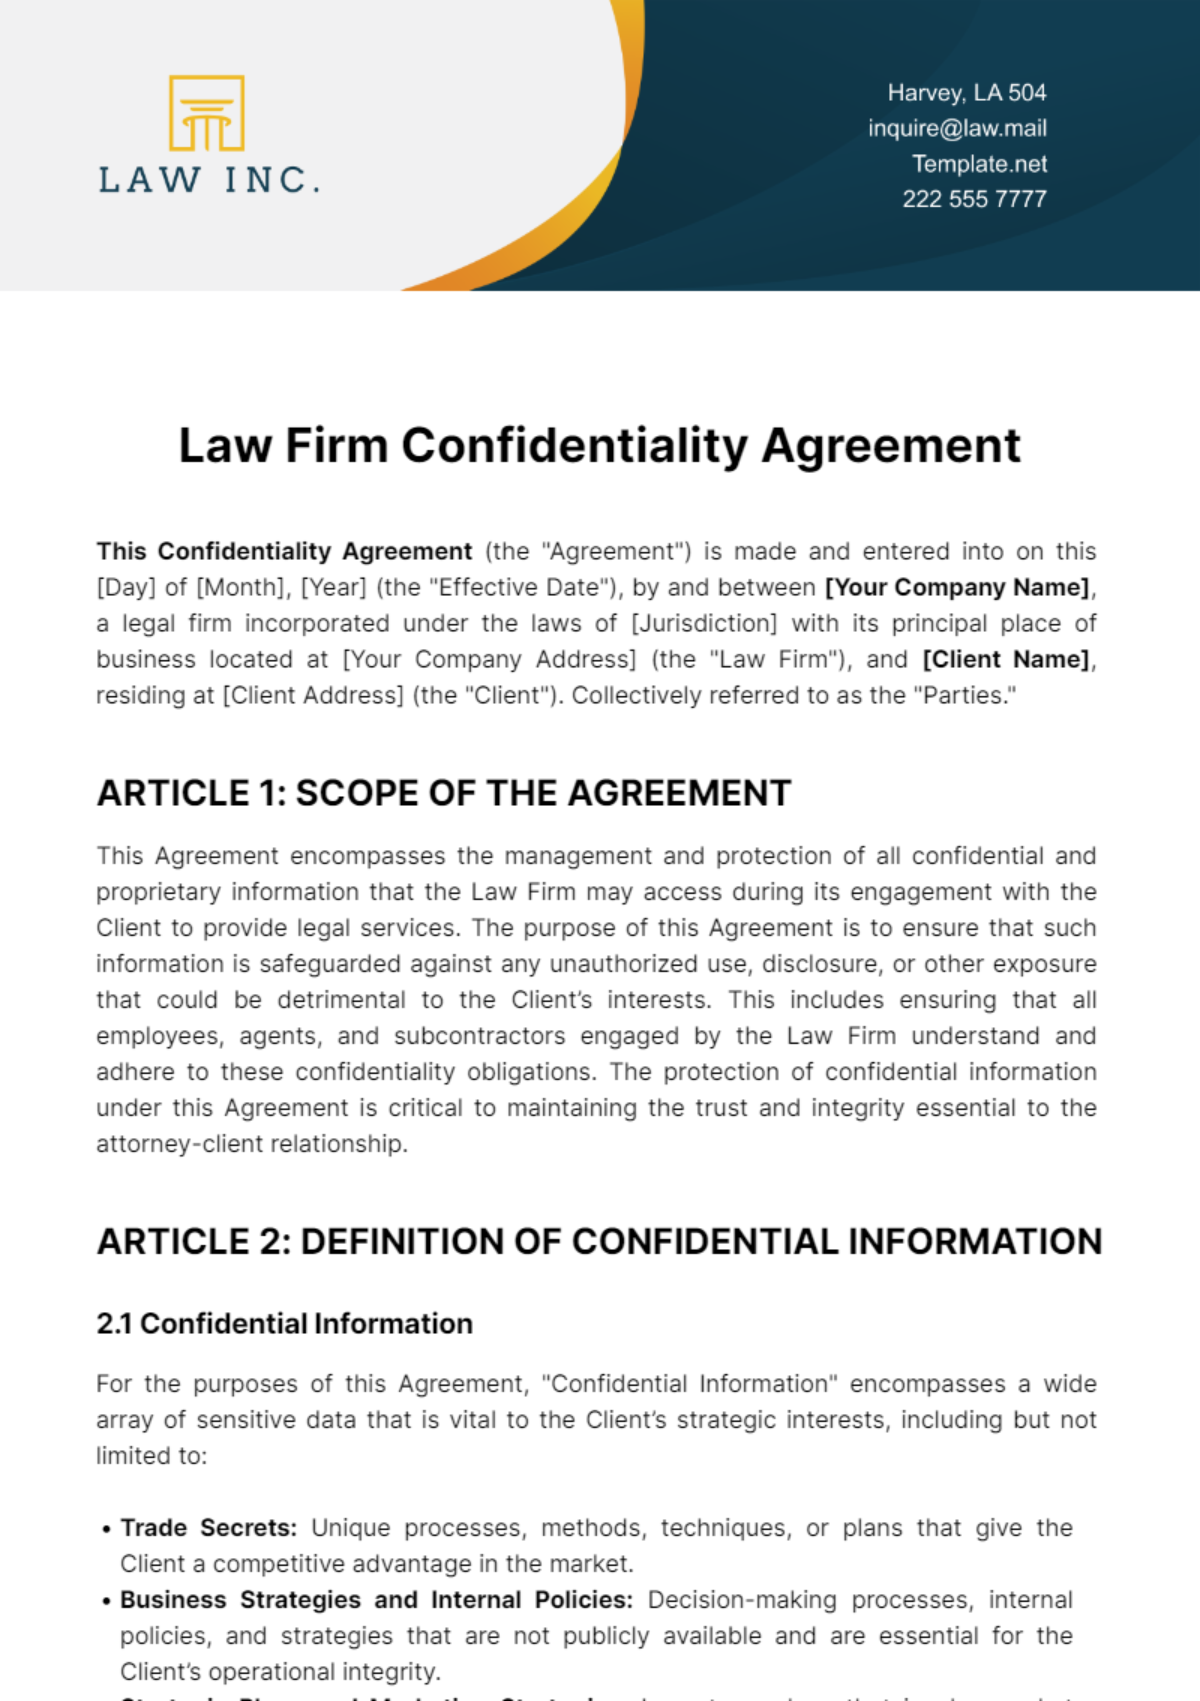 Law Firm Confidentiality Agreement Template